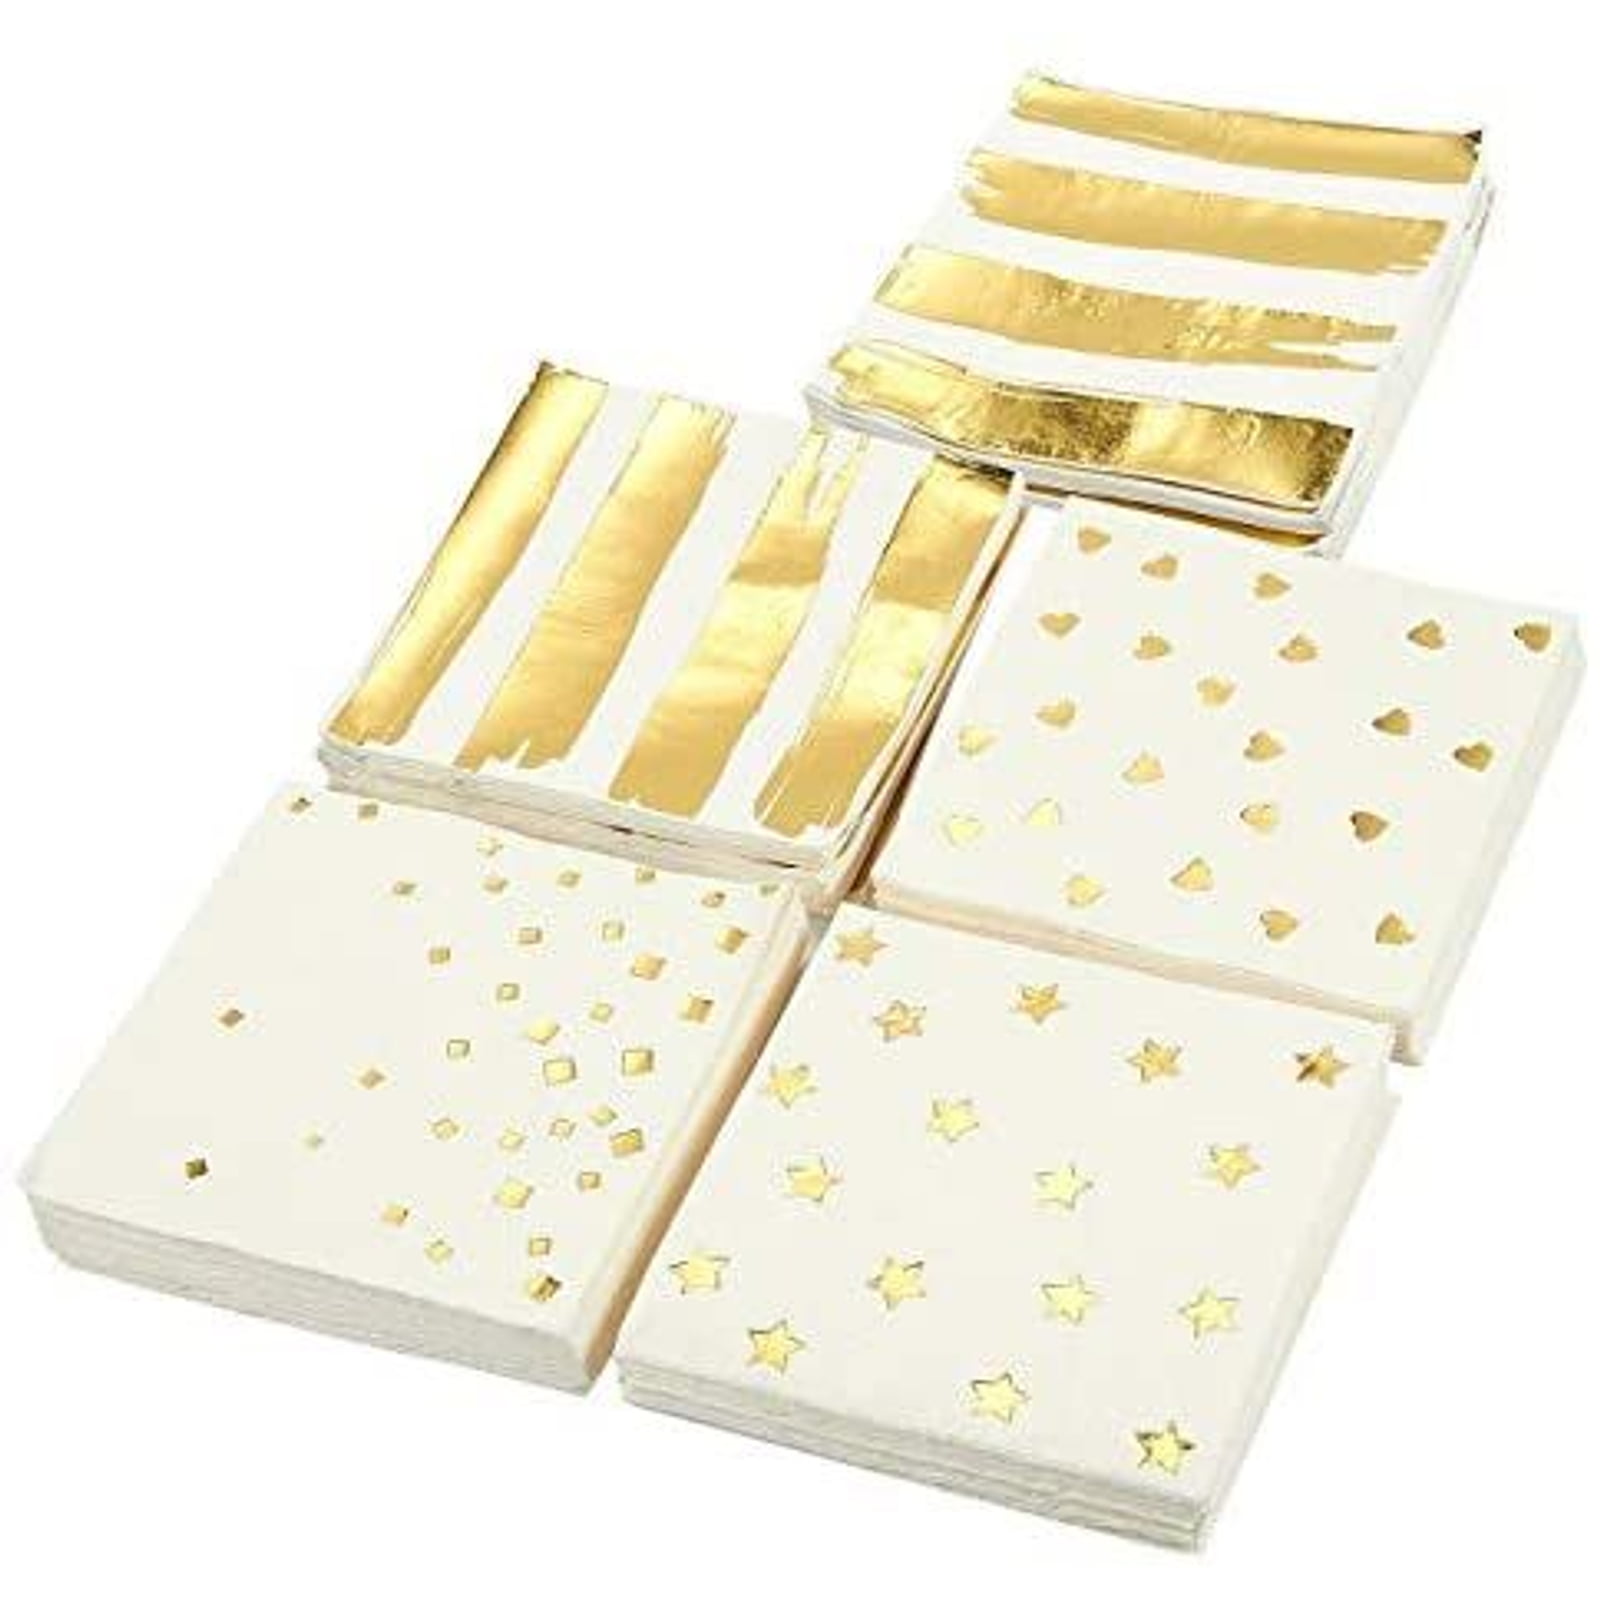 20 Paper Party Napkins Wildlife Gold Star Pack of 20 3 Ply Tissue Serviettes 